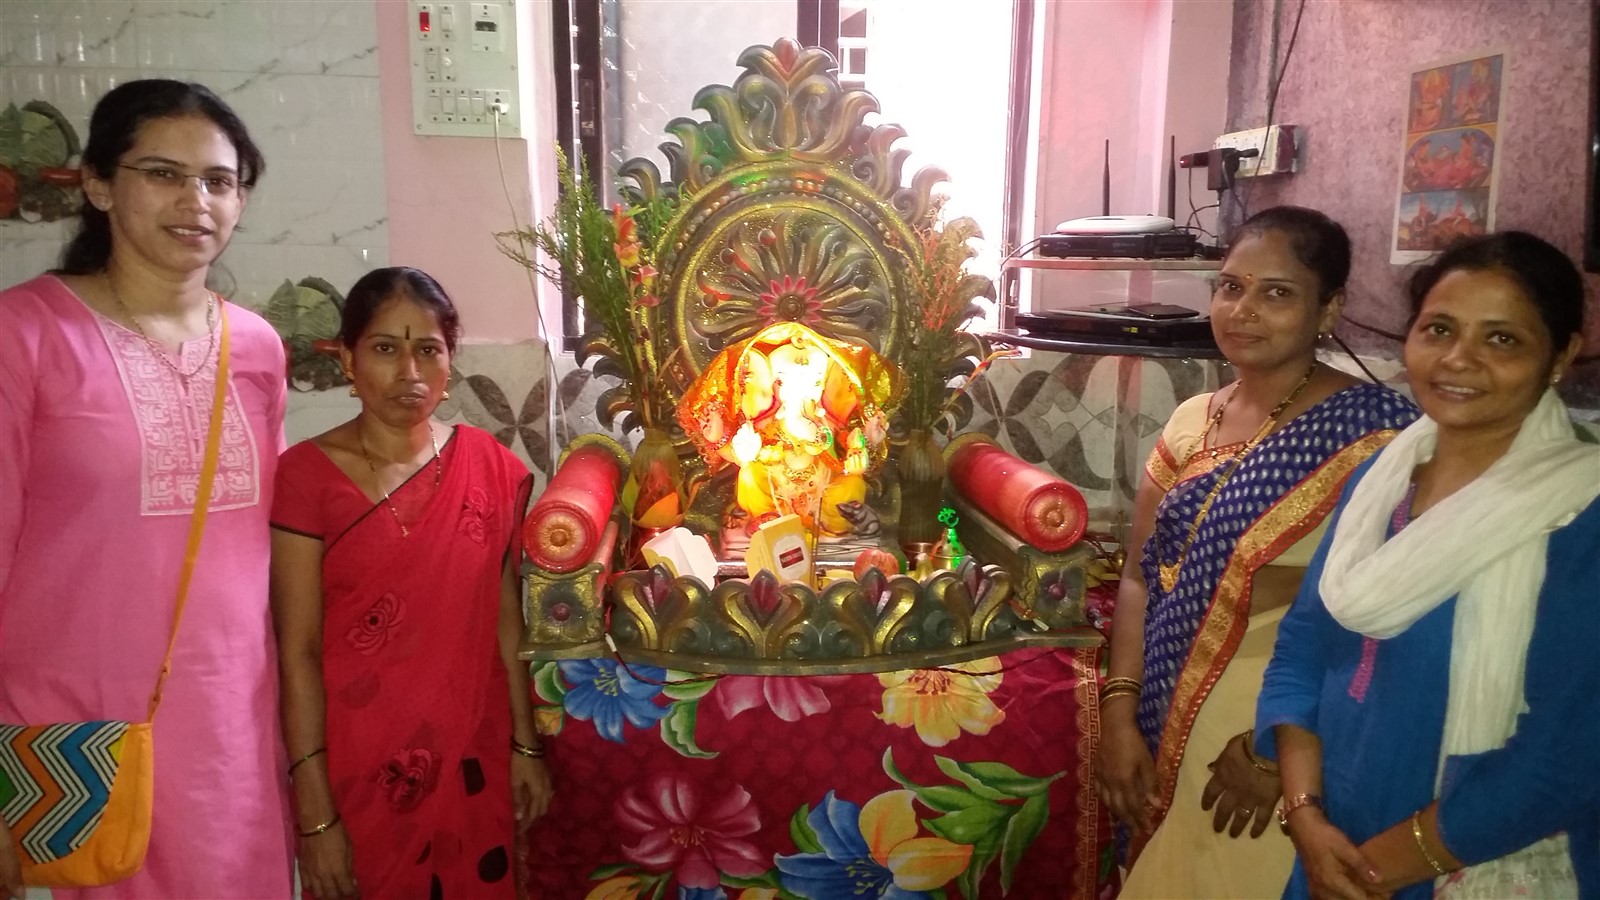 A visit to meet Lord Ganesha during the Ganesh Festival